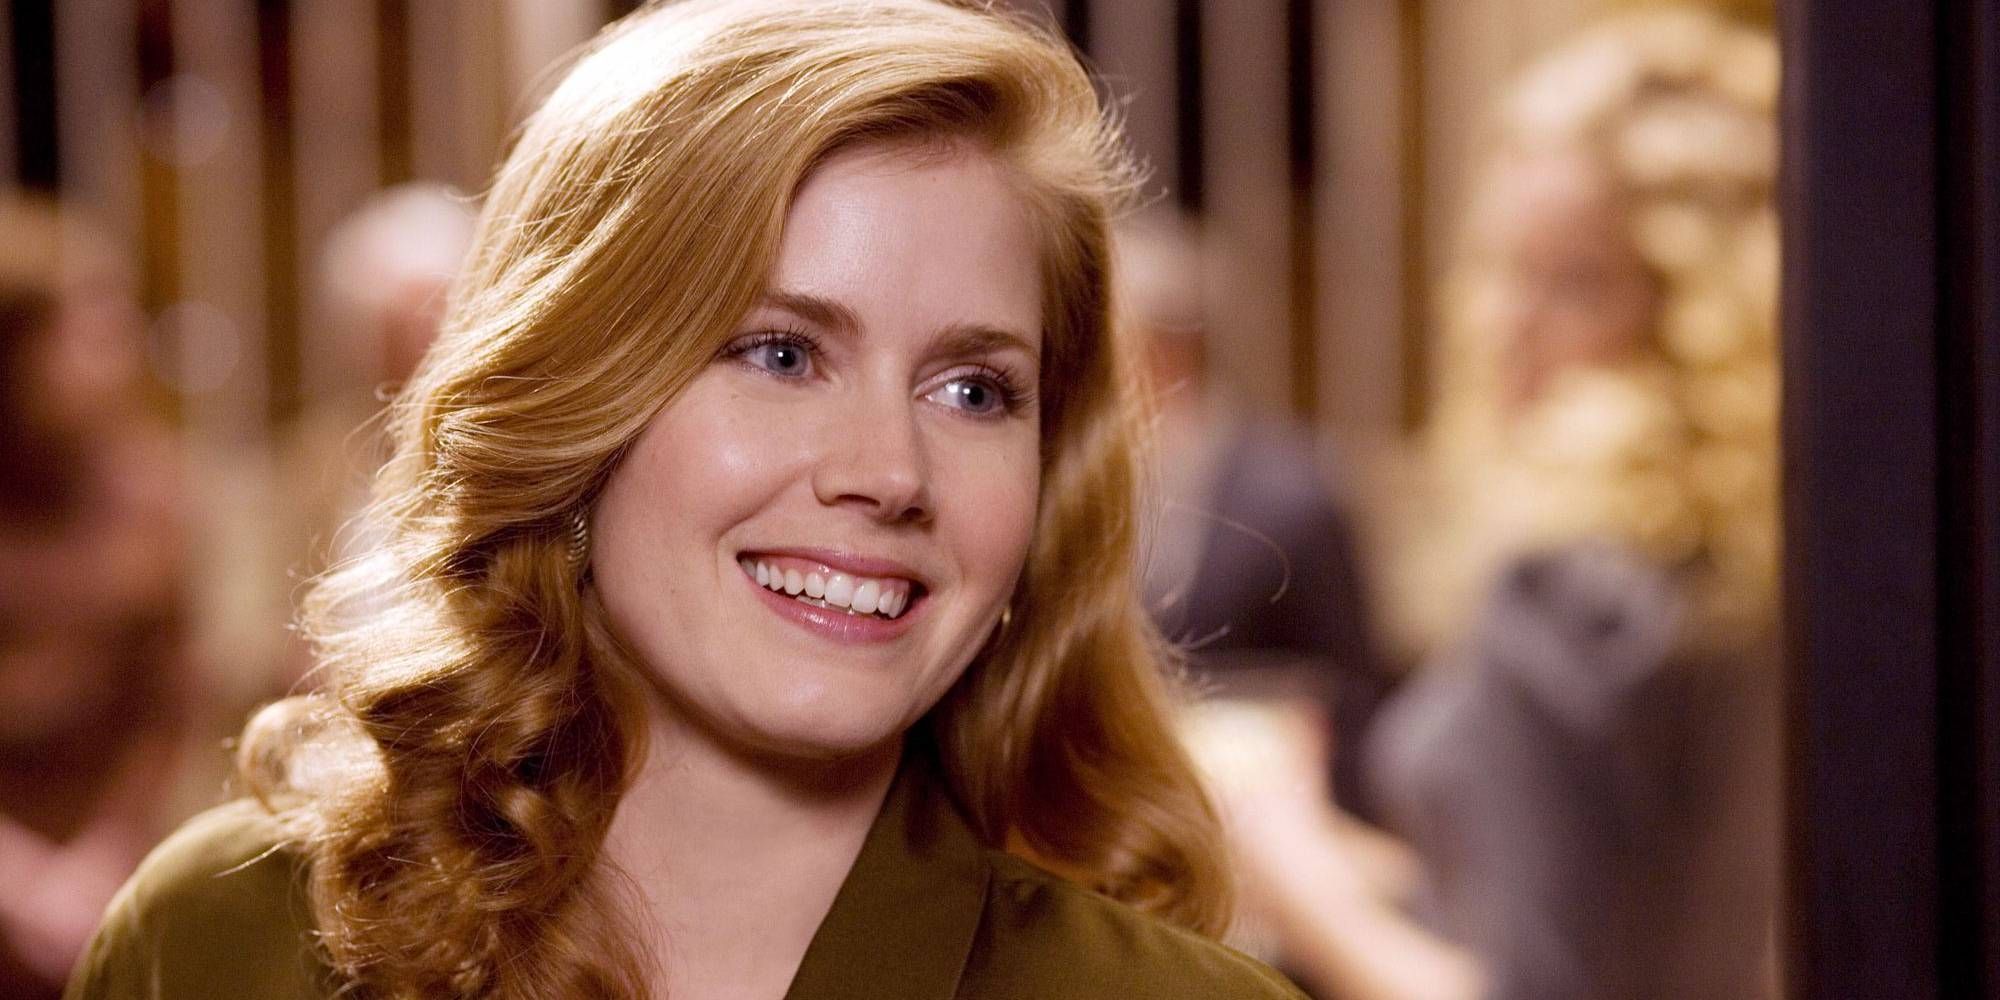 A close-up still of Amy Adams' character Bonnie Bach smiling in Charlie Wilson's War.